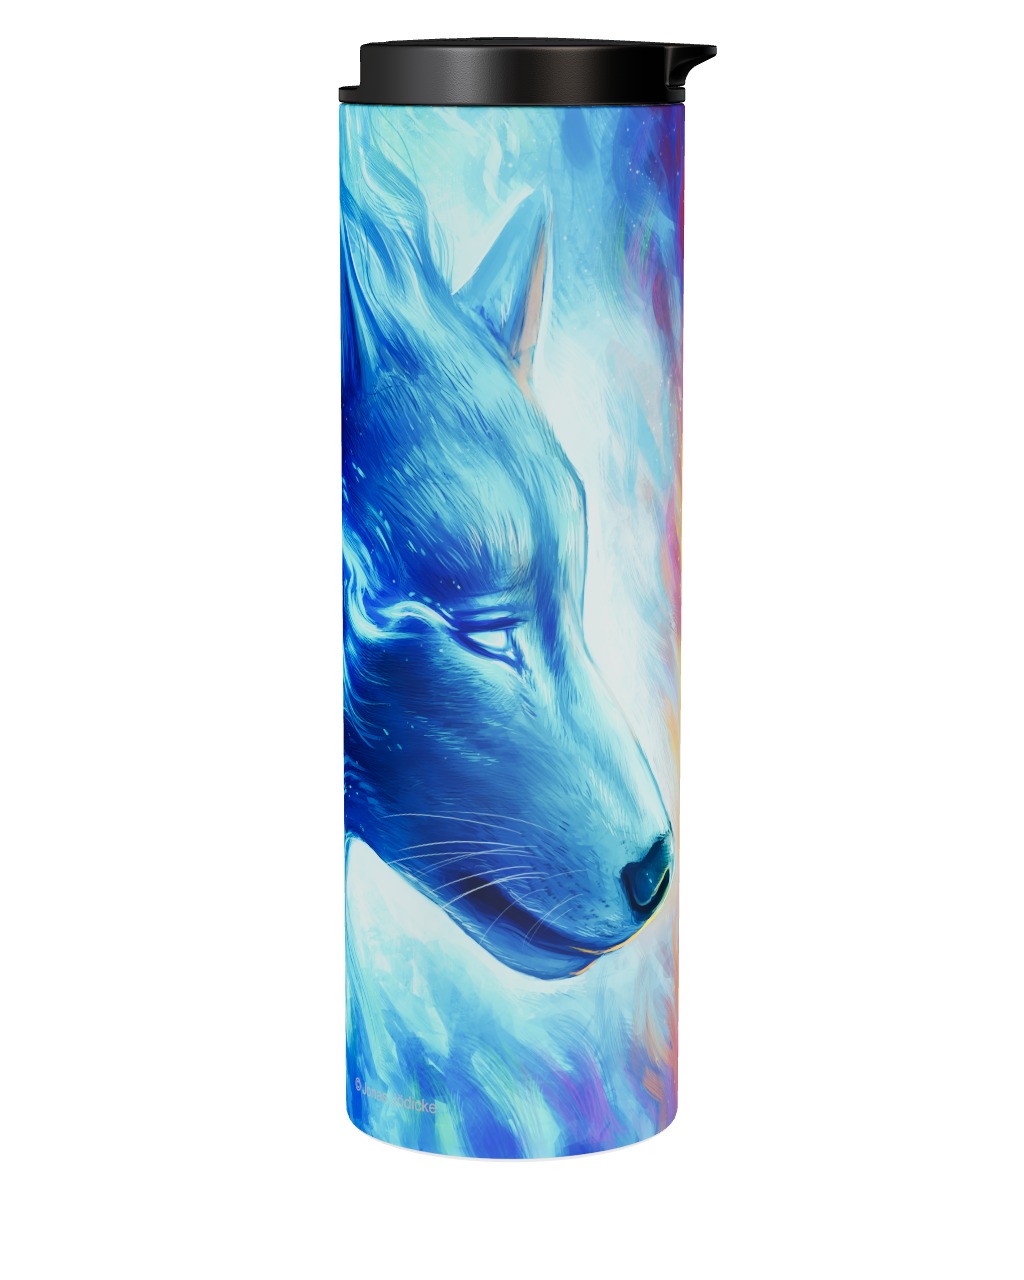 Fire And Ice - Wolves Tumbler